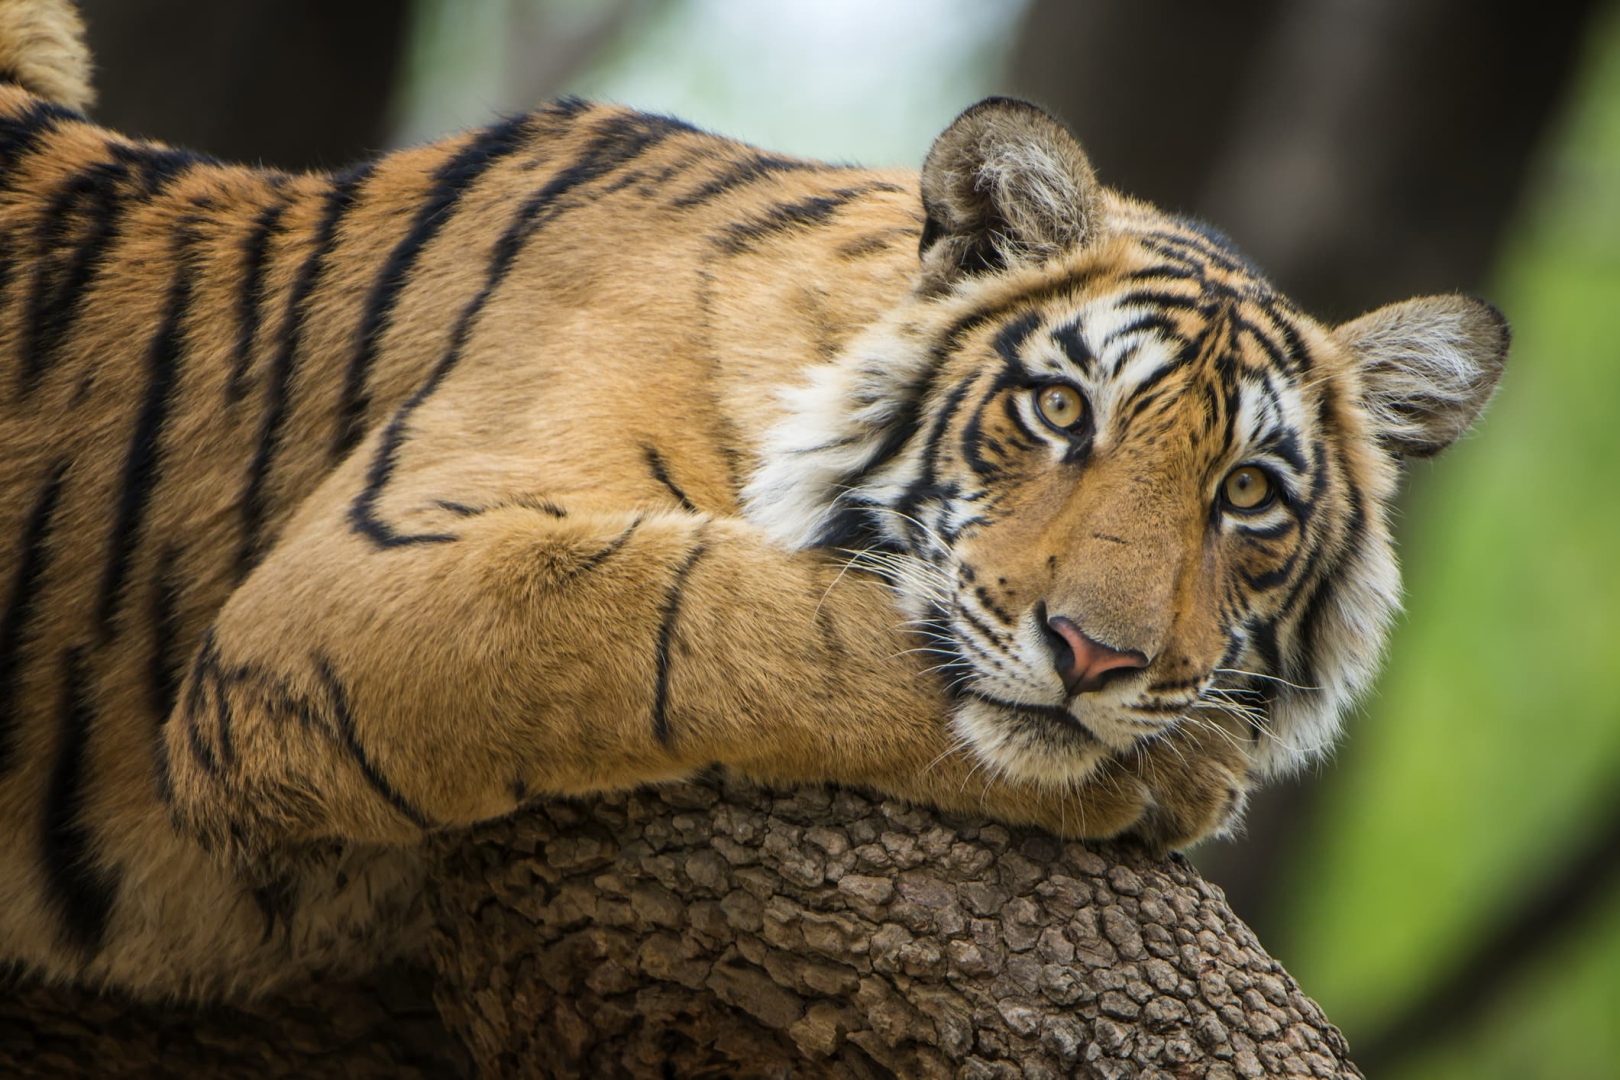 ﻿Eye of the tiger: Reality check on ‘International Tiger Day’